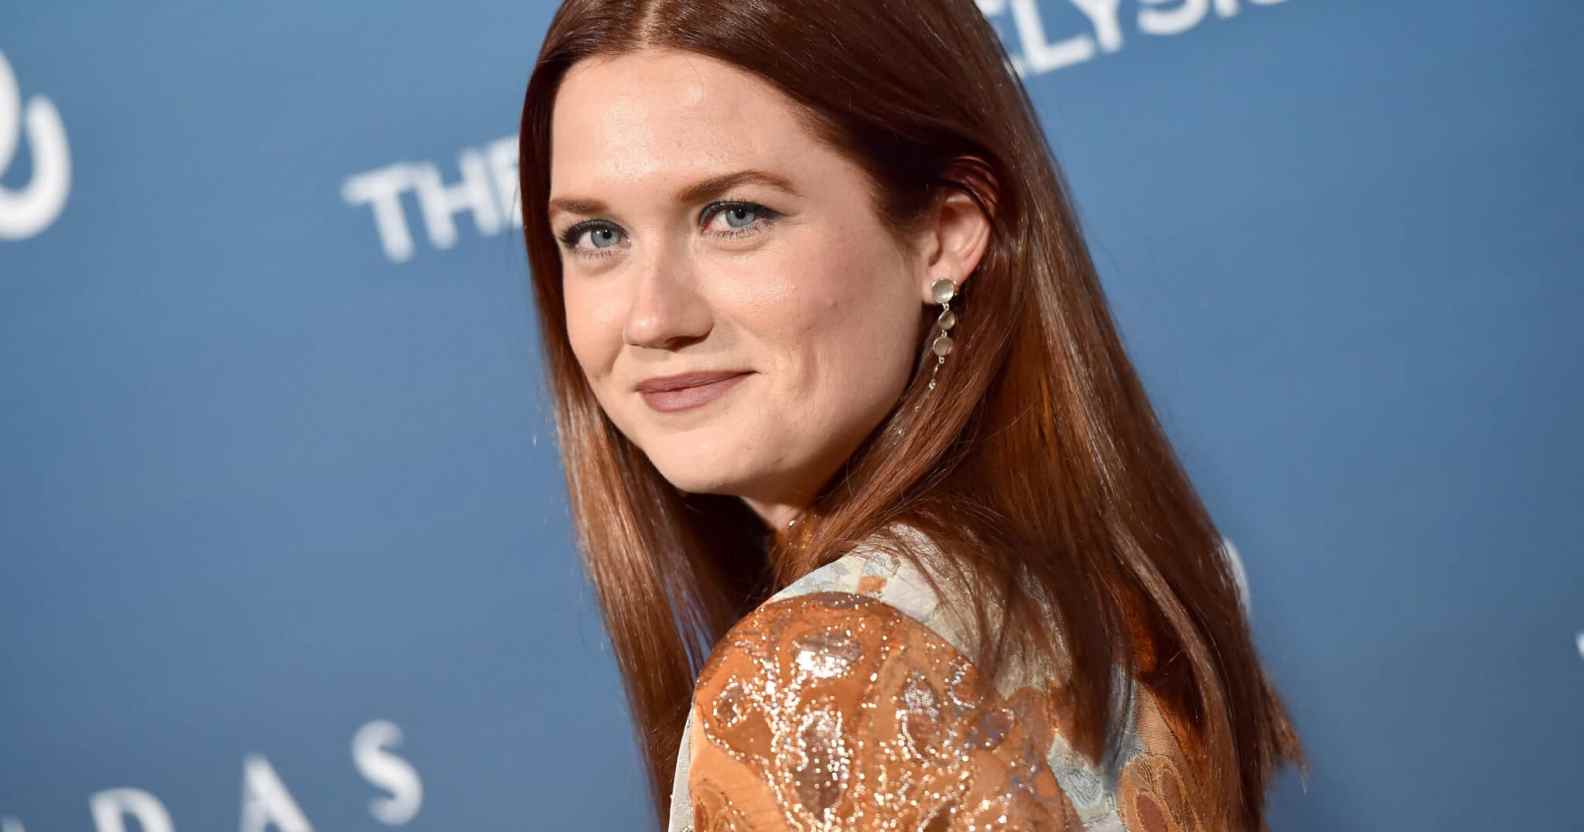 Bonnie Wright explains that she no longer wants to talk about JK Rowling